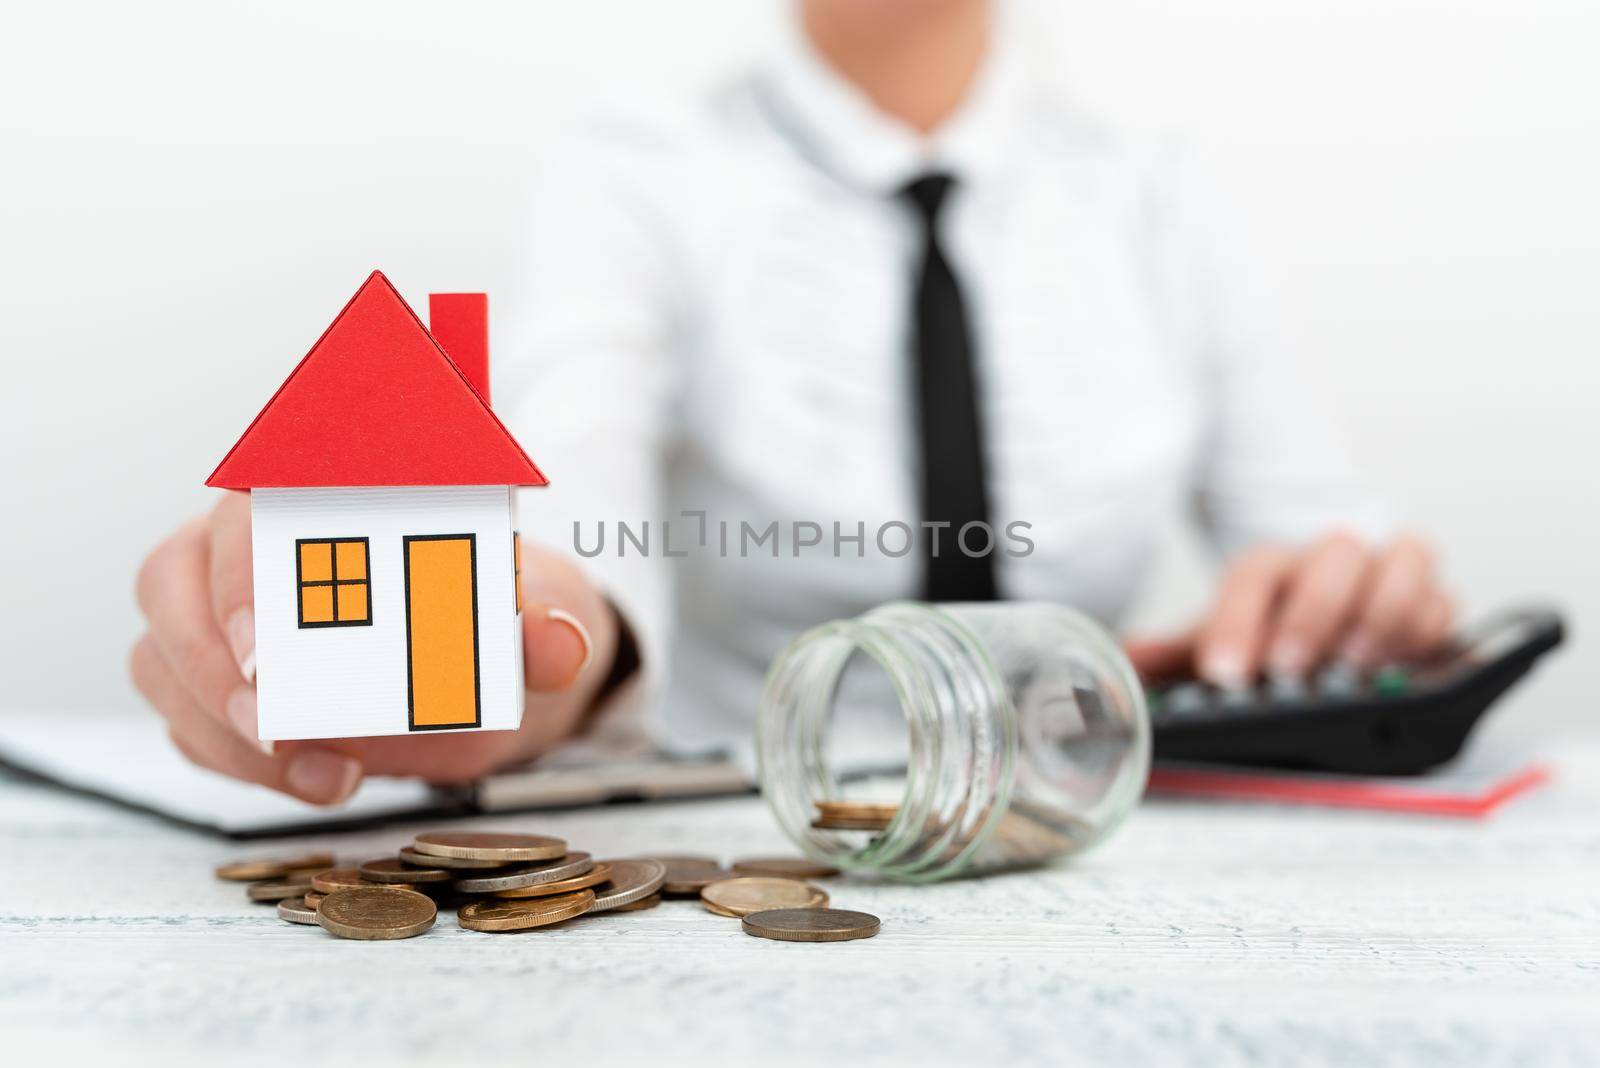 Lady Presenting New Home Savings Deals In Outfit, Business Woman Showing Possible Investment Oppurtiunities For New House, Mortegage Installments Exhibits For Recent Apartments Sales by nialowwa